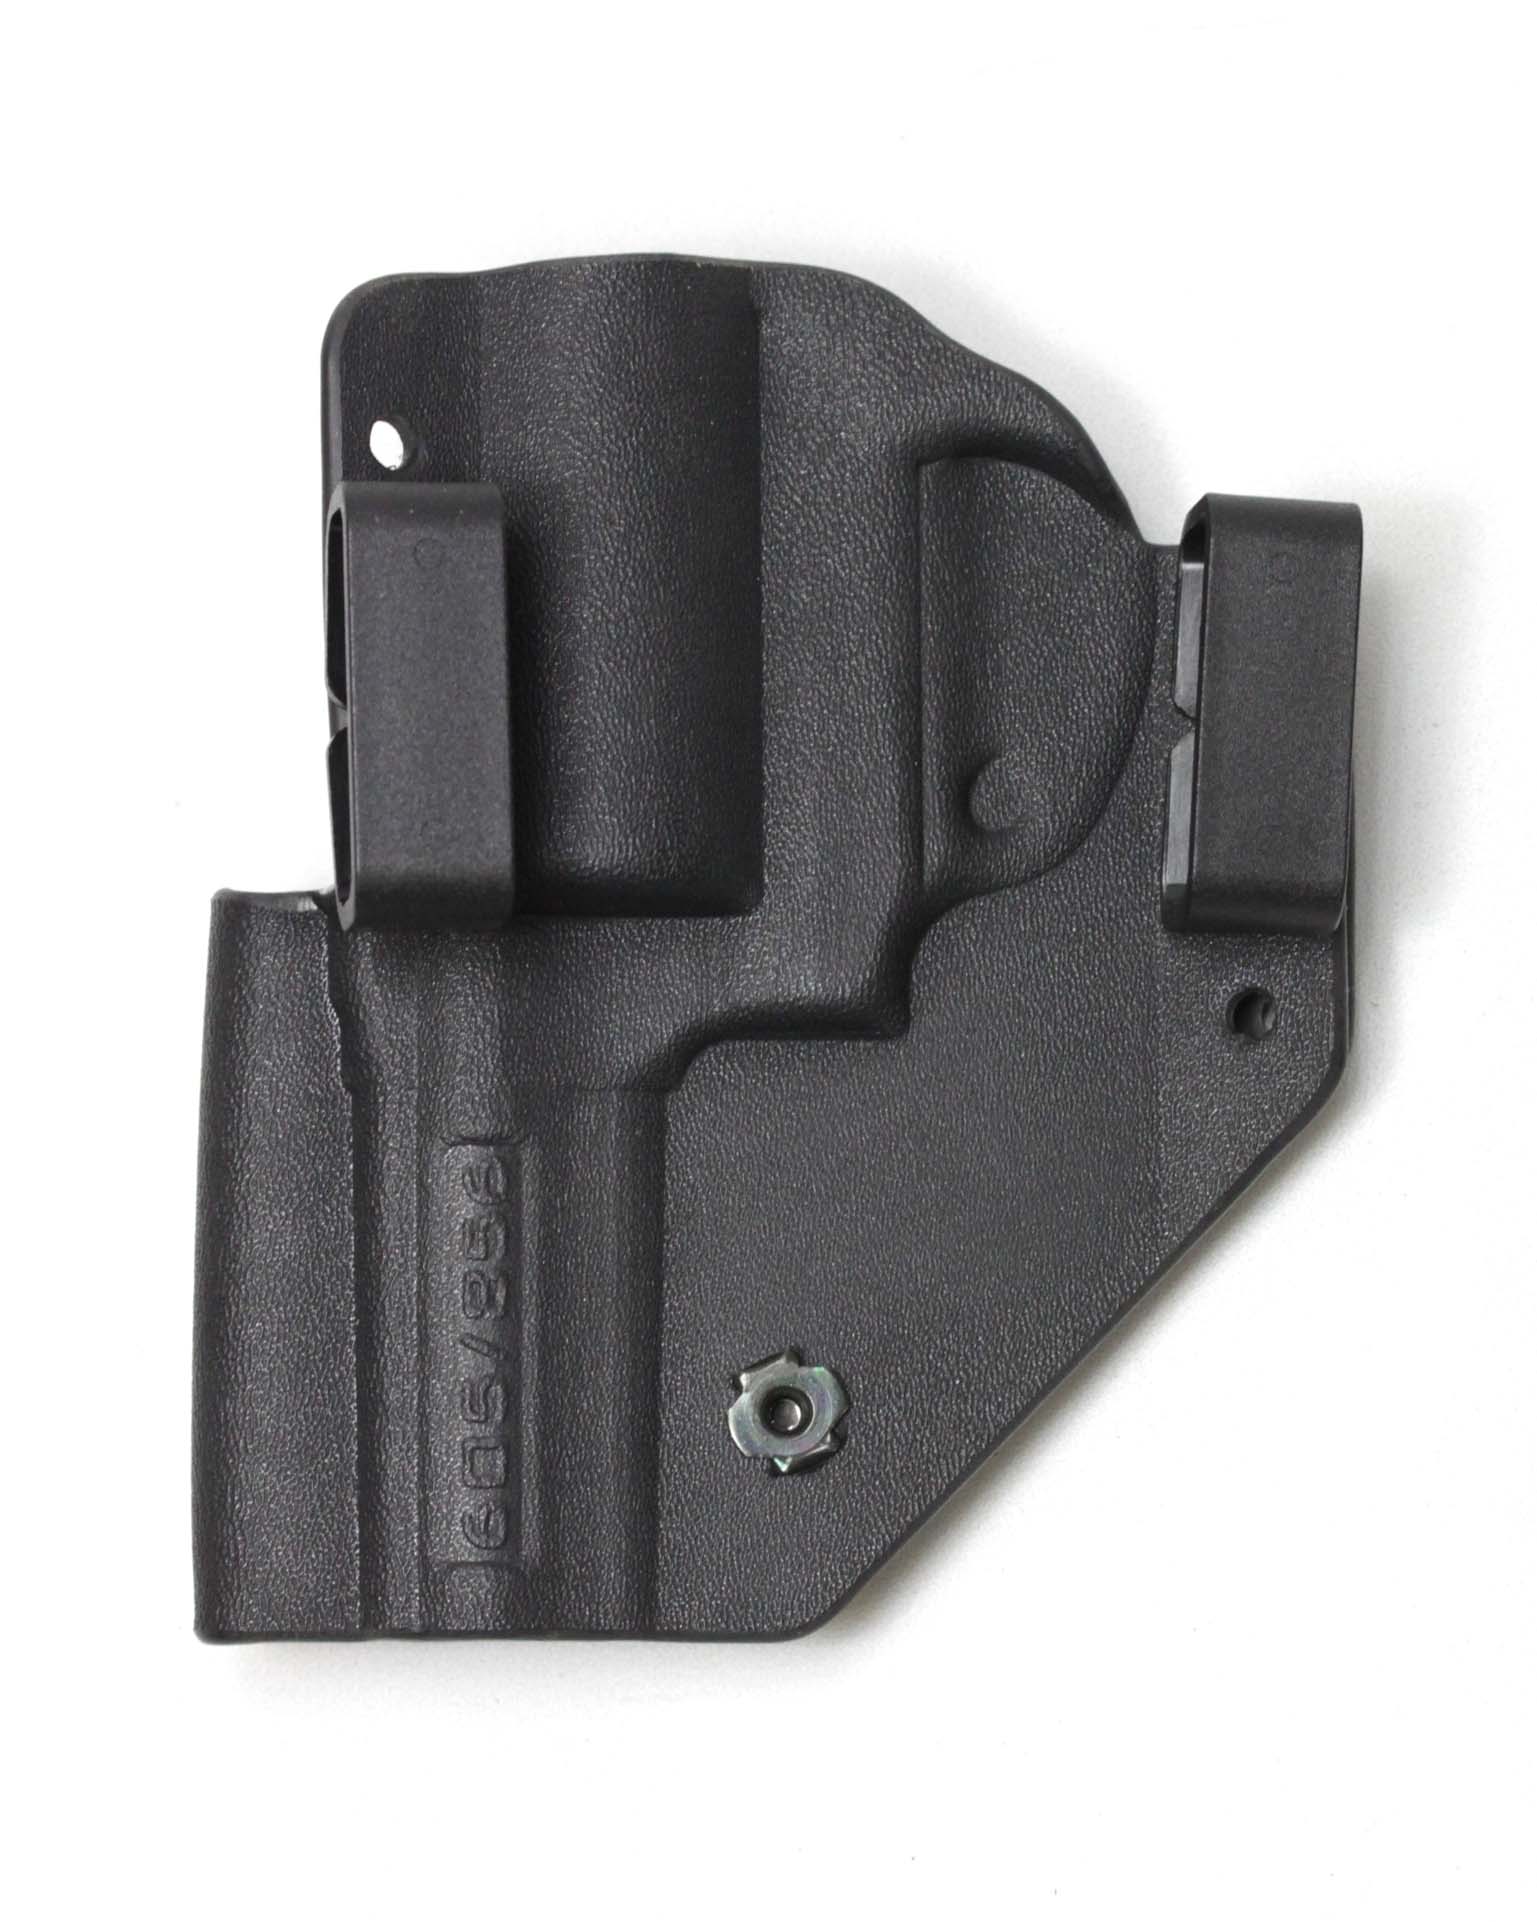 SPEED BEEZ® Kydex® Revolver Holsters Classic OWB (Outside Waist Band)